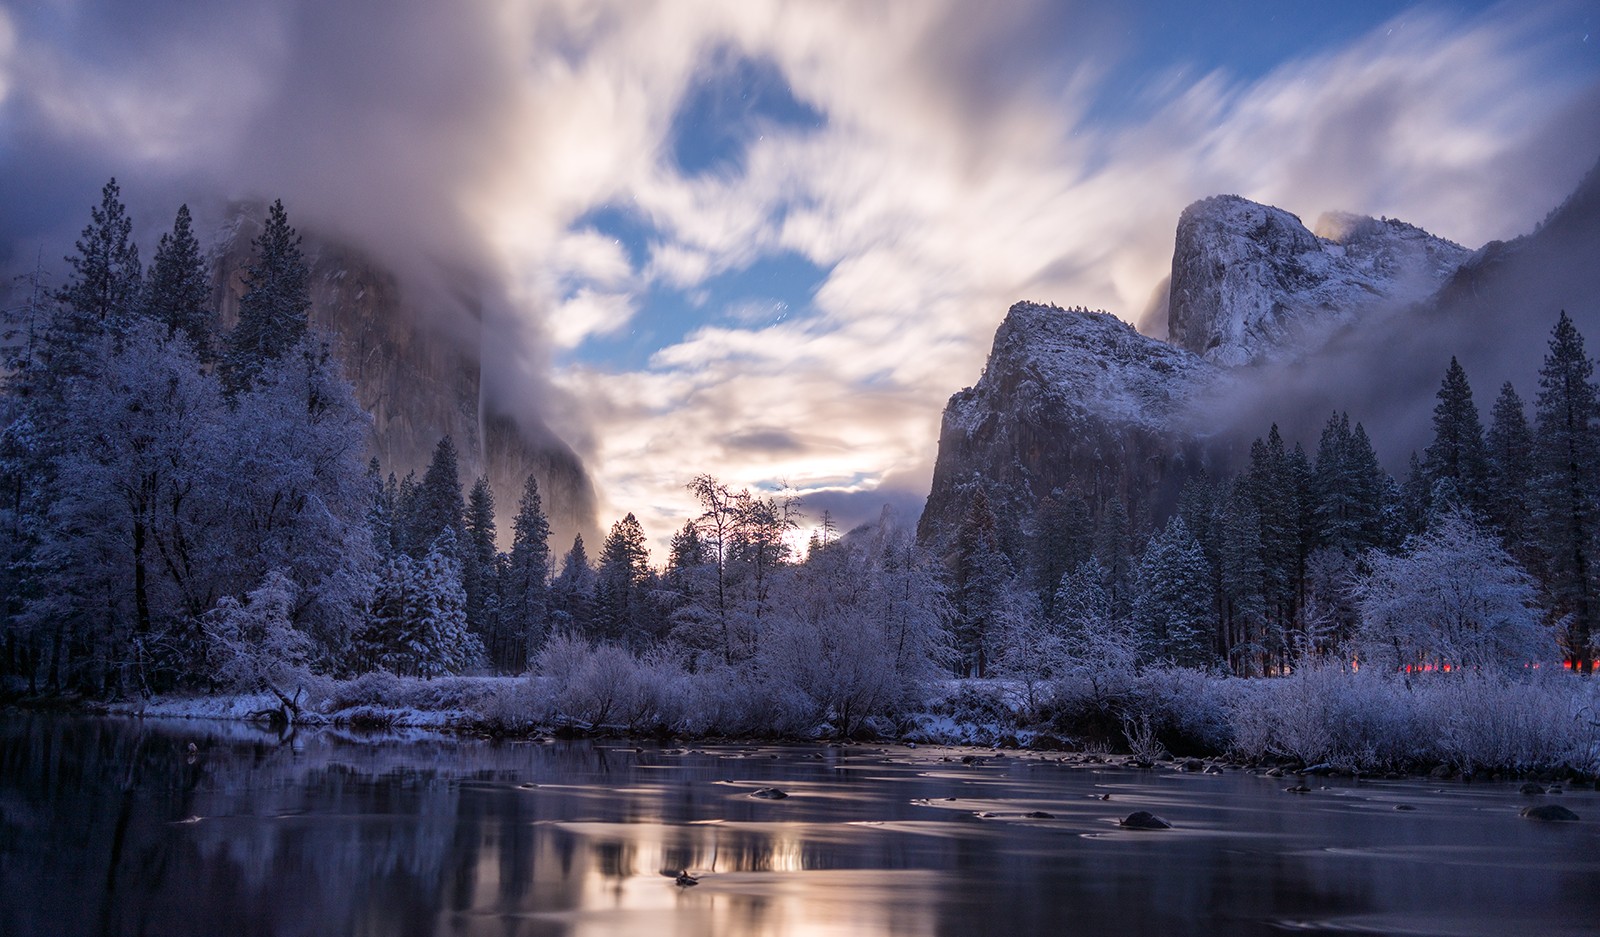 General 1600x937 mountains Yosemite National Park winter frost snow trees clouds landscape national park El Capitan nature cold outdoors